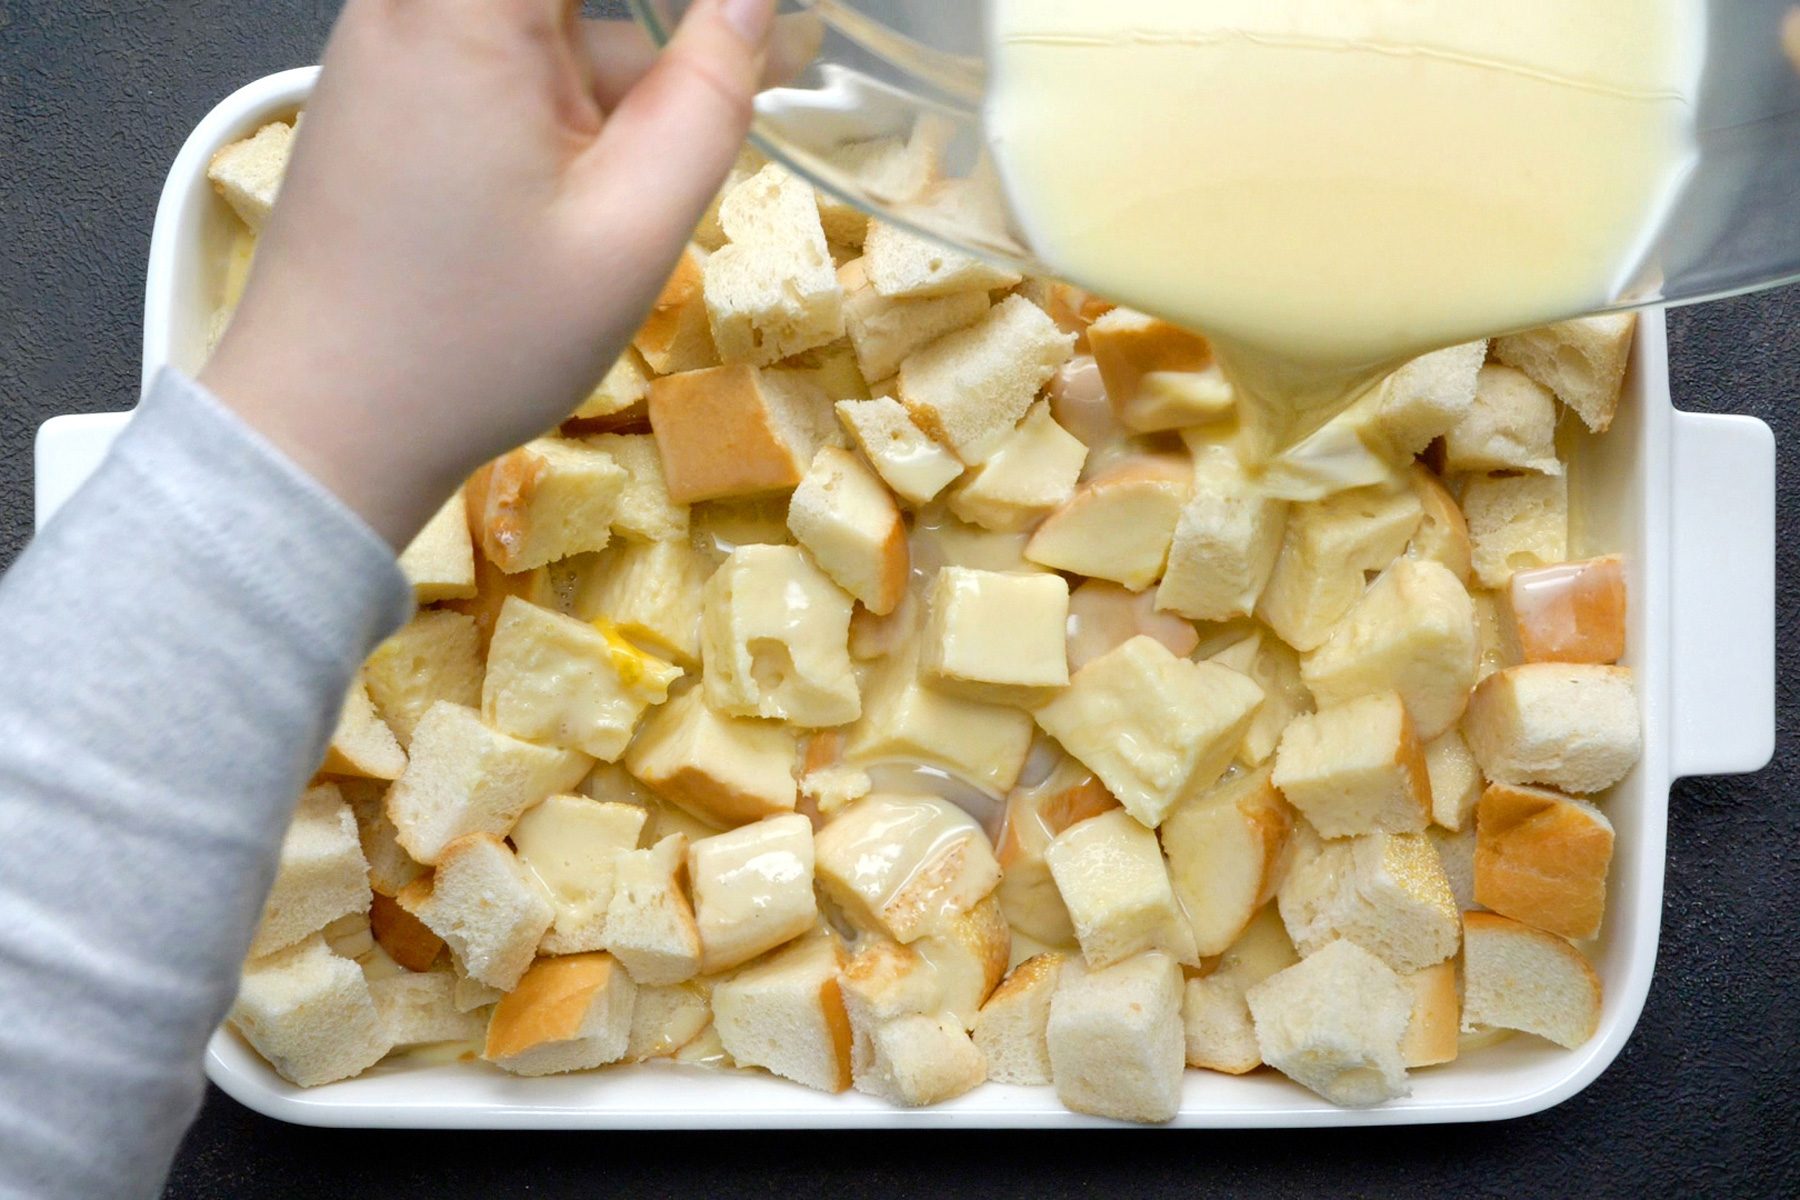 A baking dish filled with French bread cubes topped with butter.